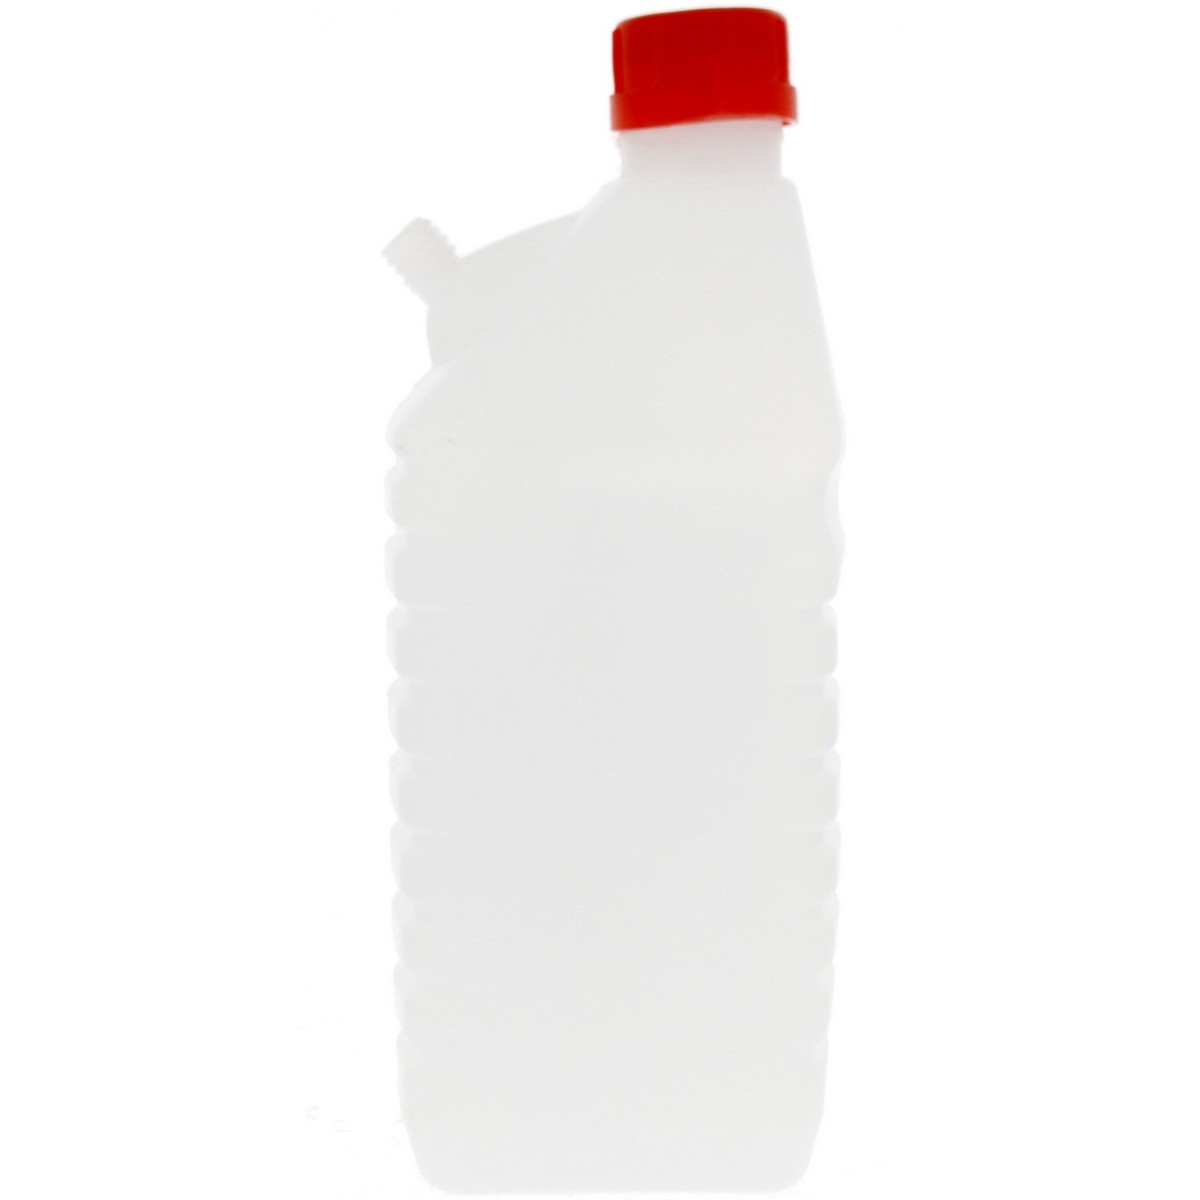 Rabee Rose Water 1 Litre